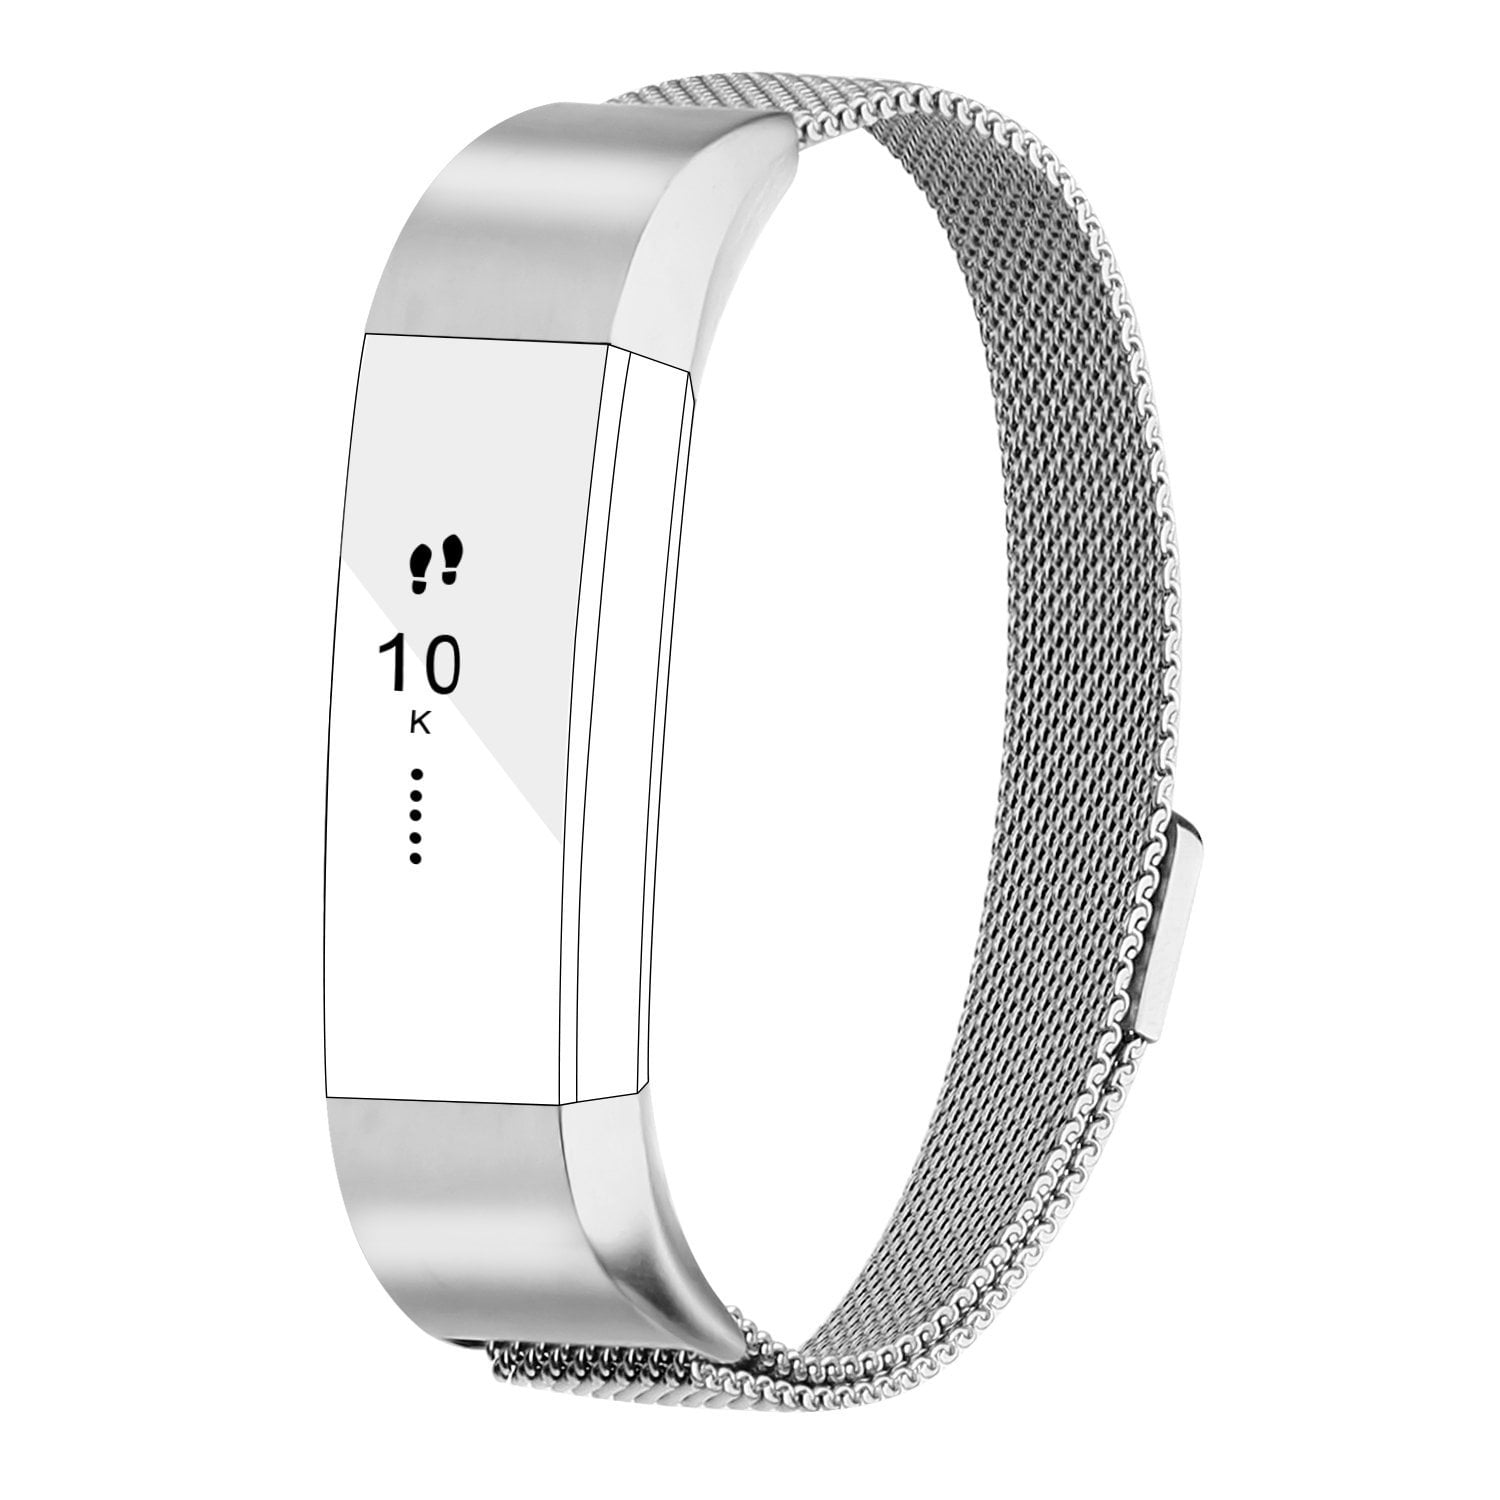 New Stainless Steel Metal Jewelry Bangle Bracelet Wristband Band For Fitbit Alta 